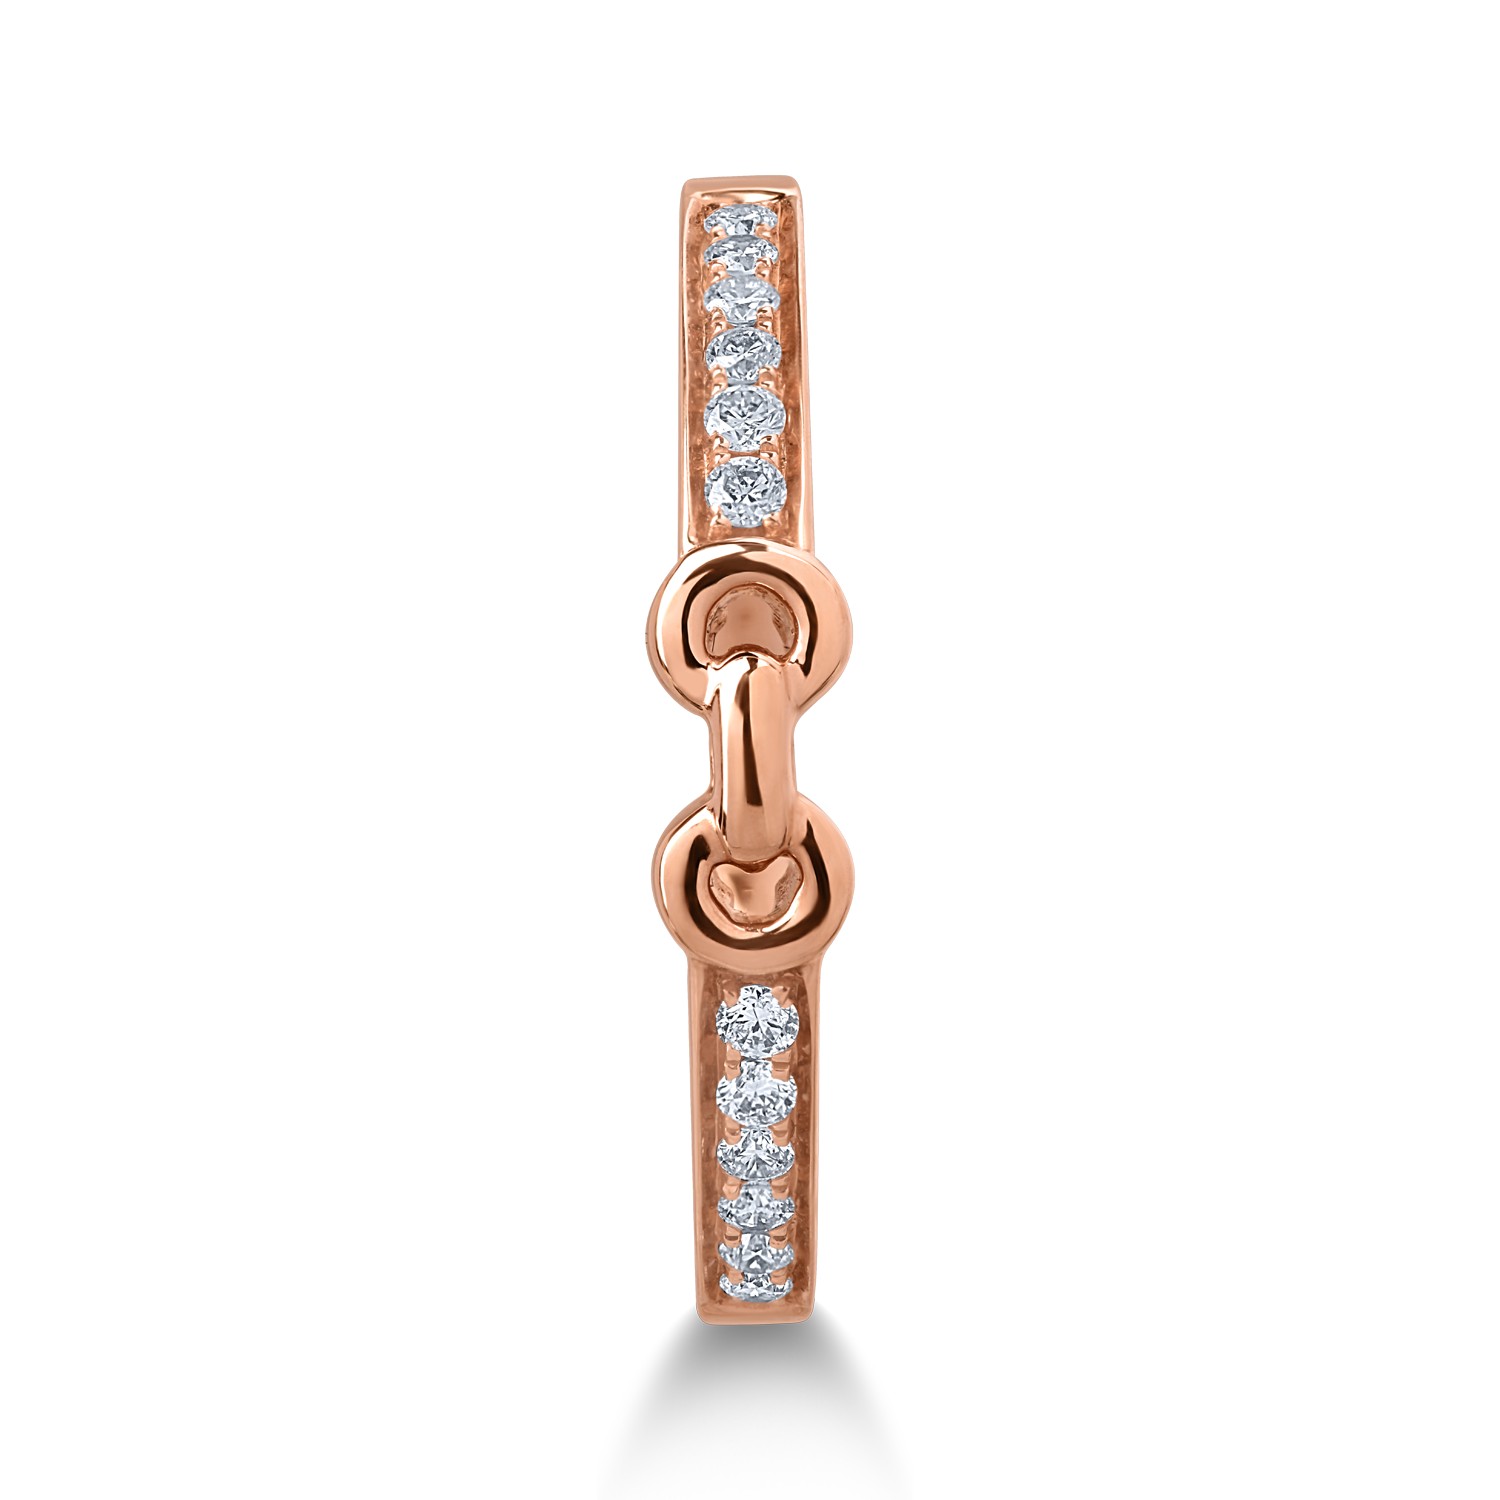 Rose gold ring with 0.11ct diamonds